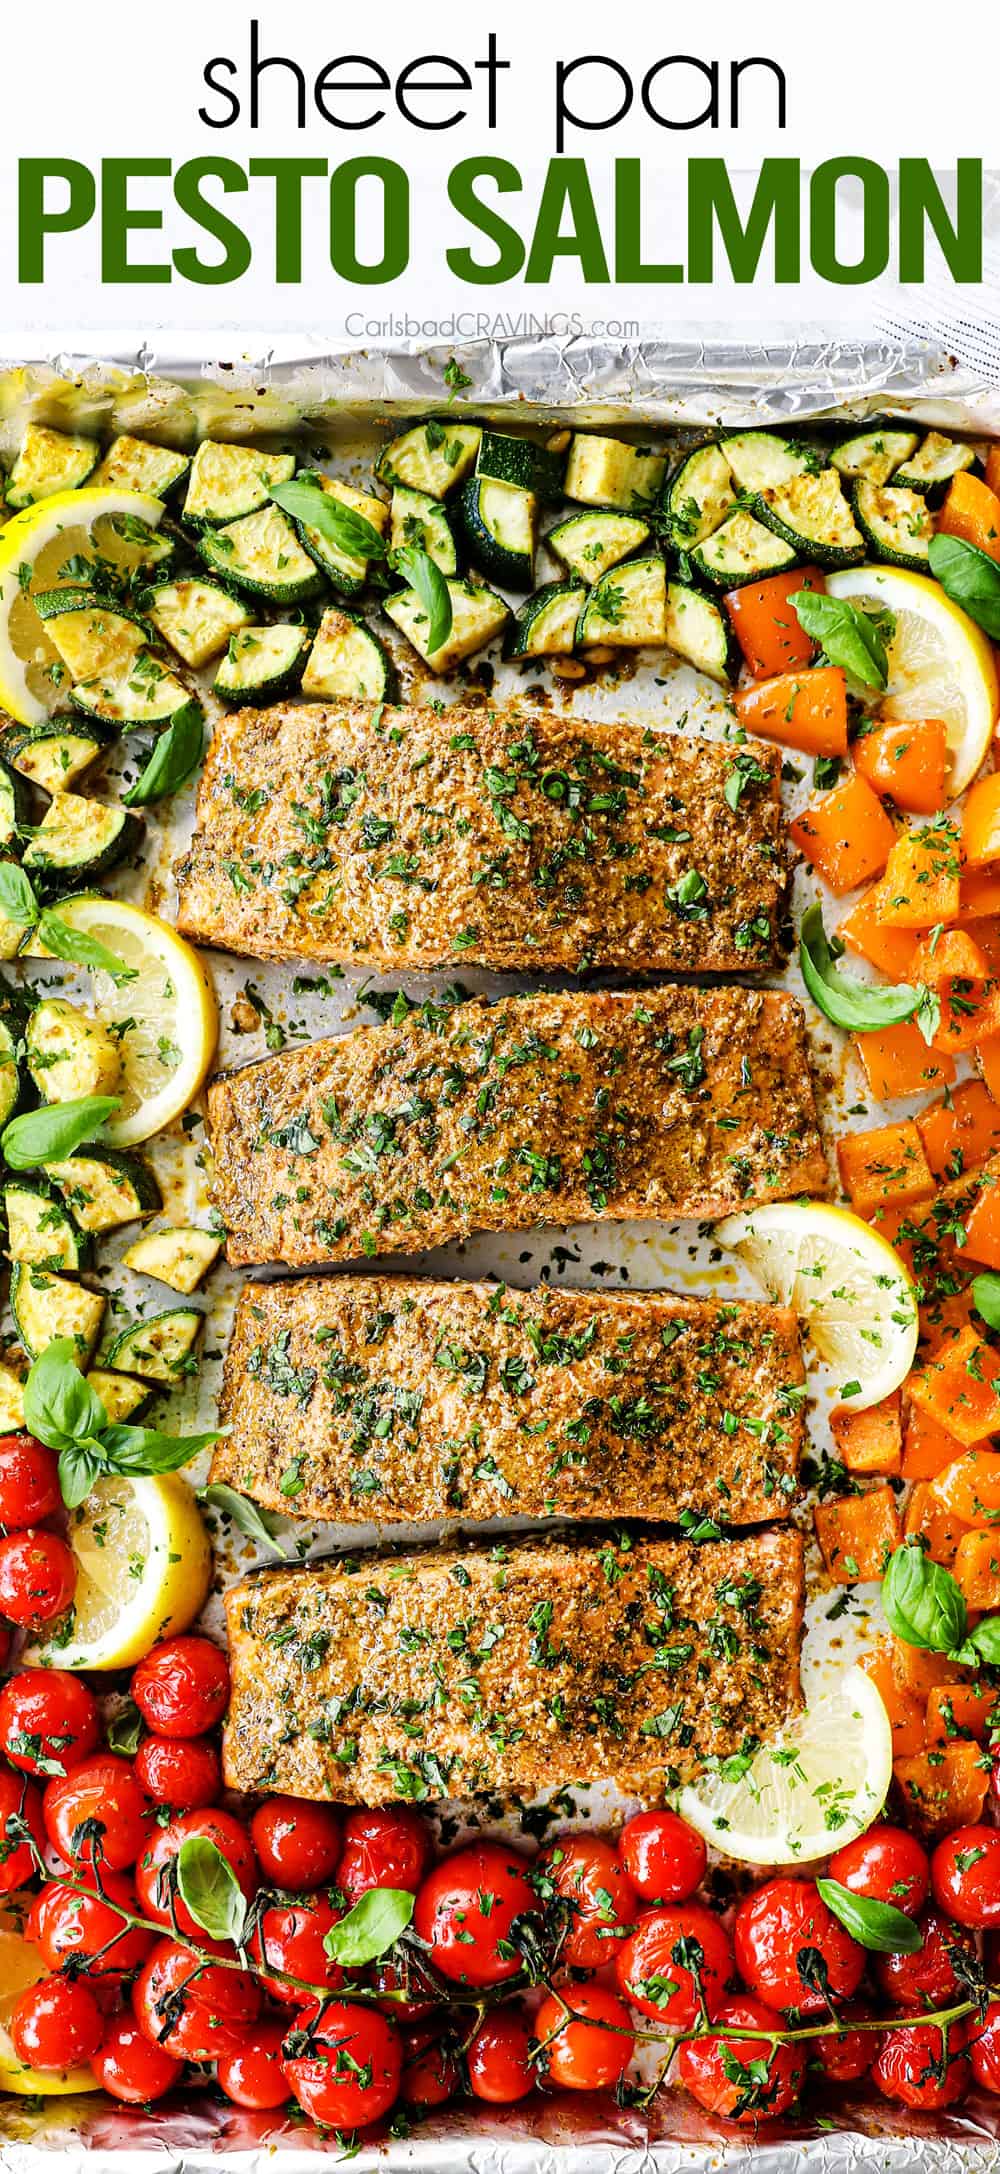 showing how to make baked pesto salmon recipe by adding salmon with pesto, tomatoes, zucchini and bell peppers on a baking sheet